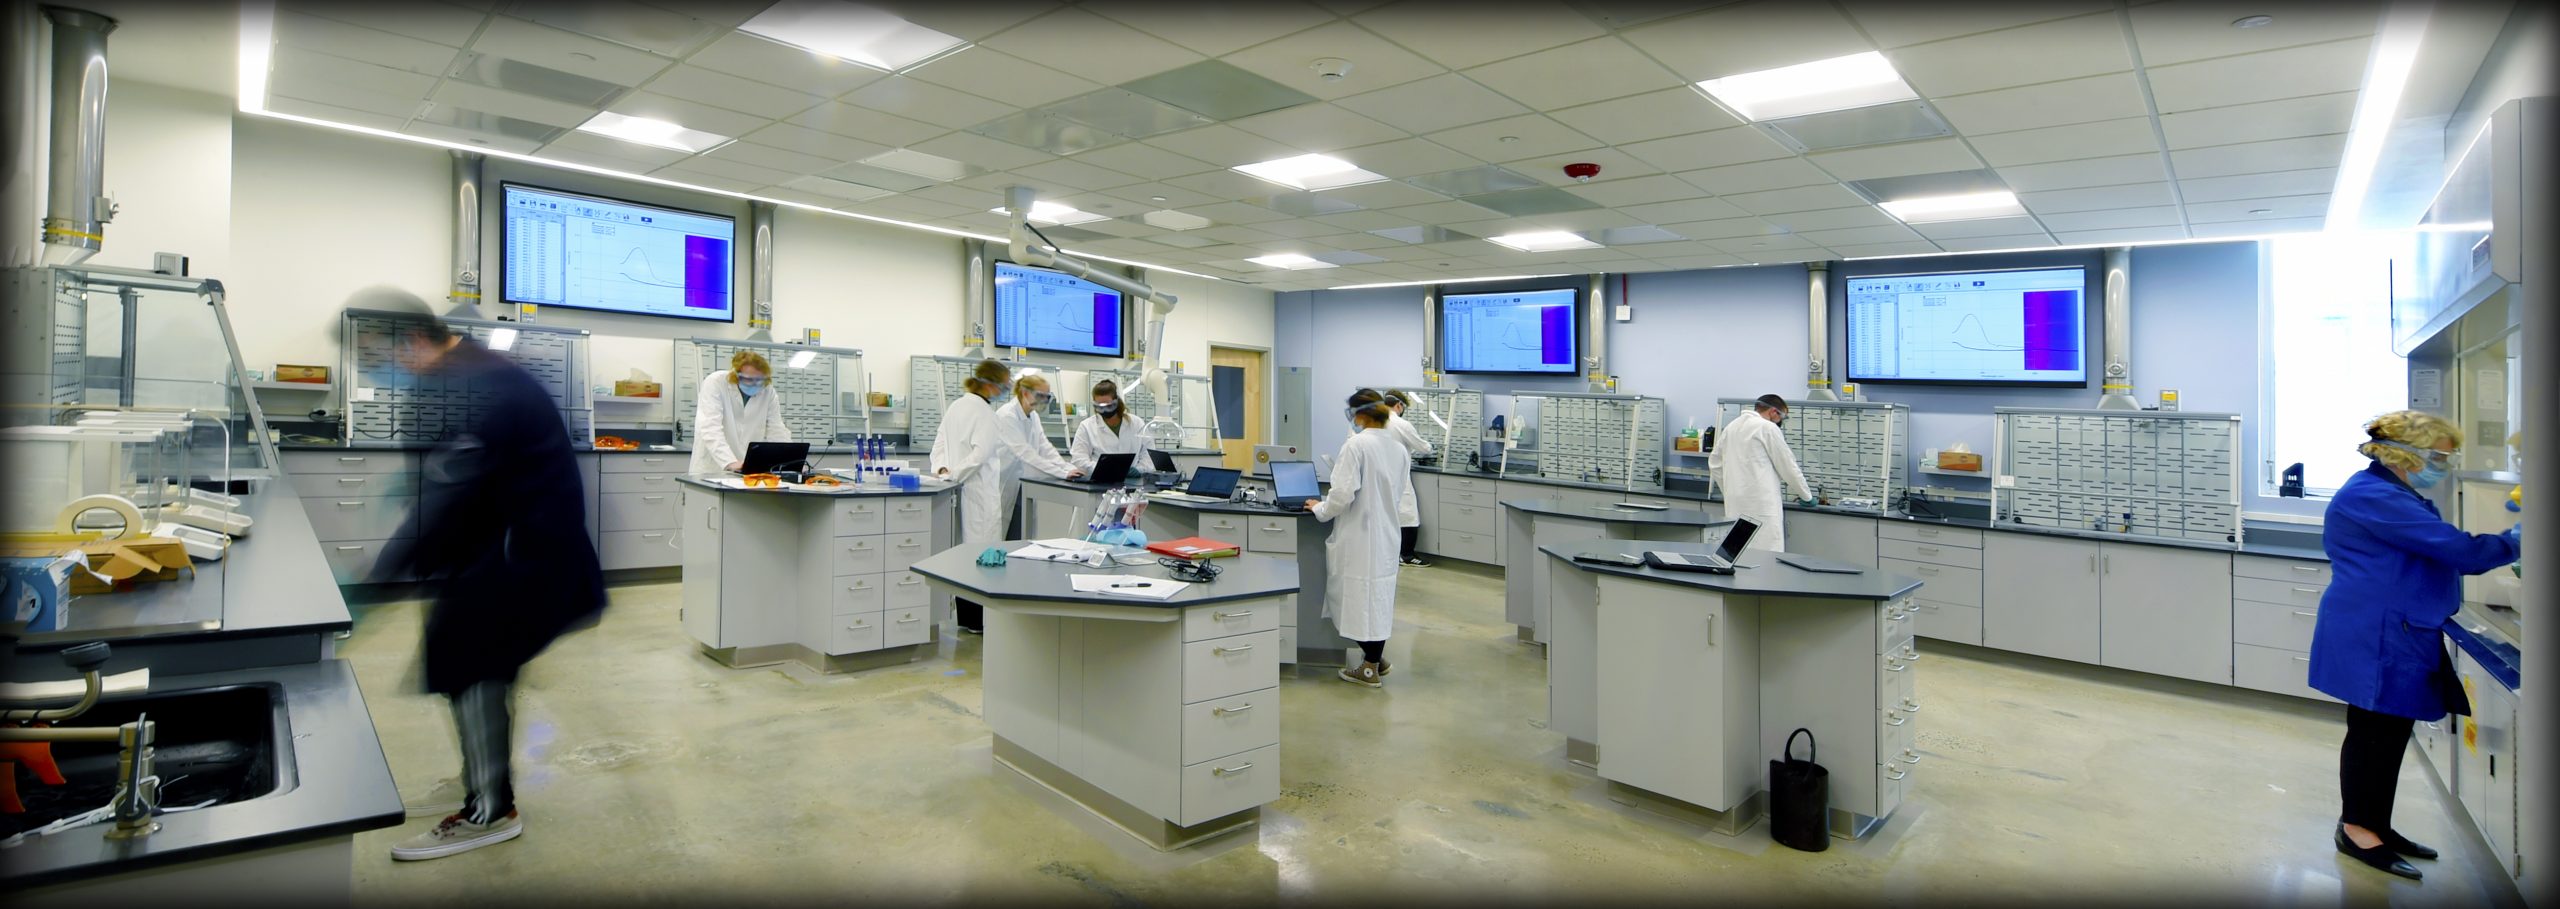 A panoramic shot of the new Lab of the Future, with lab tables in the center. People in lab coats work at the tables.